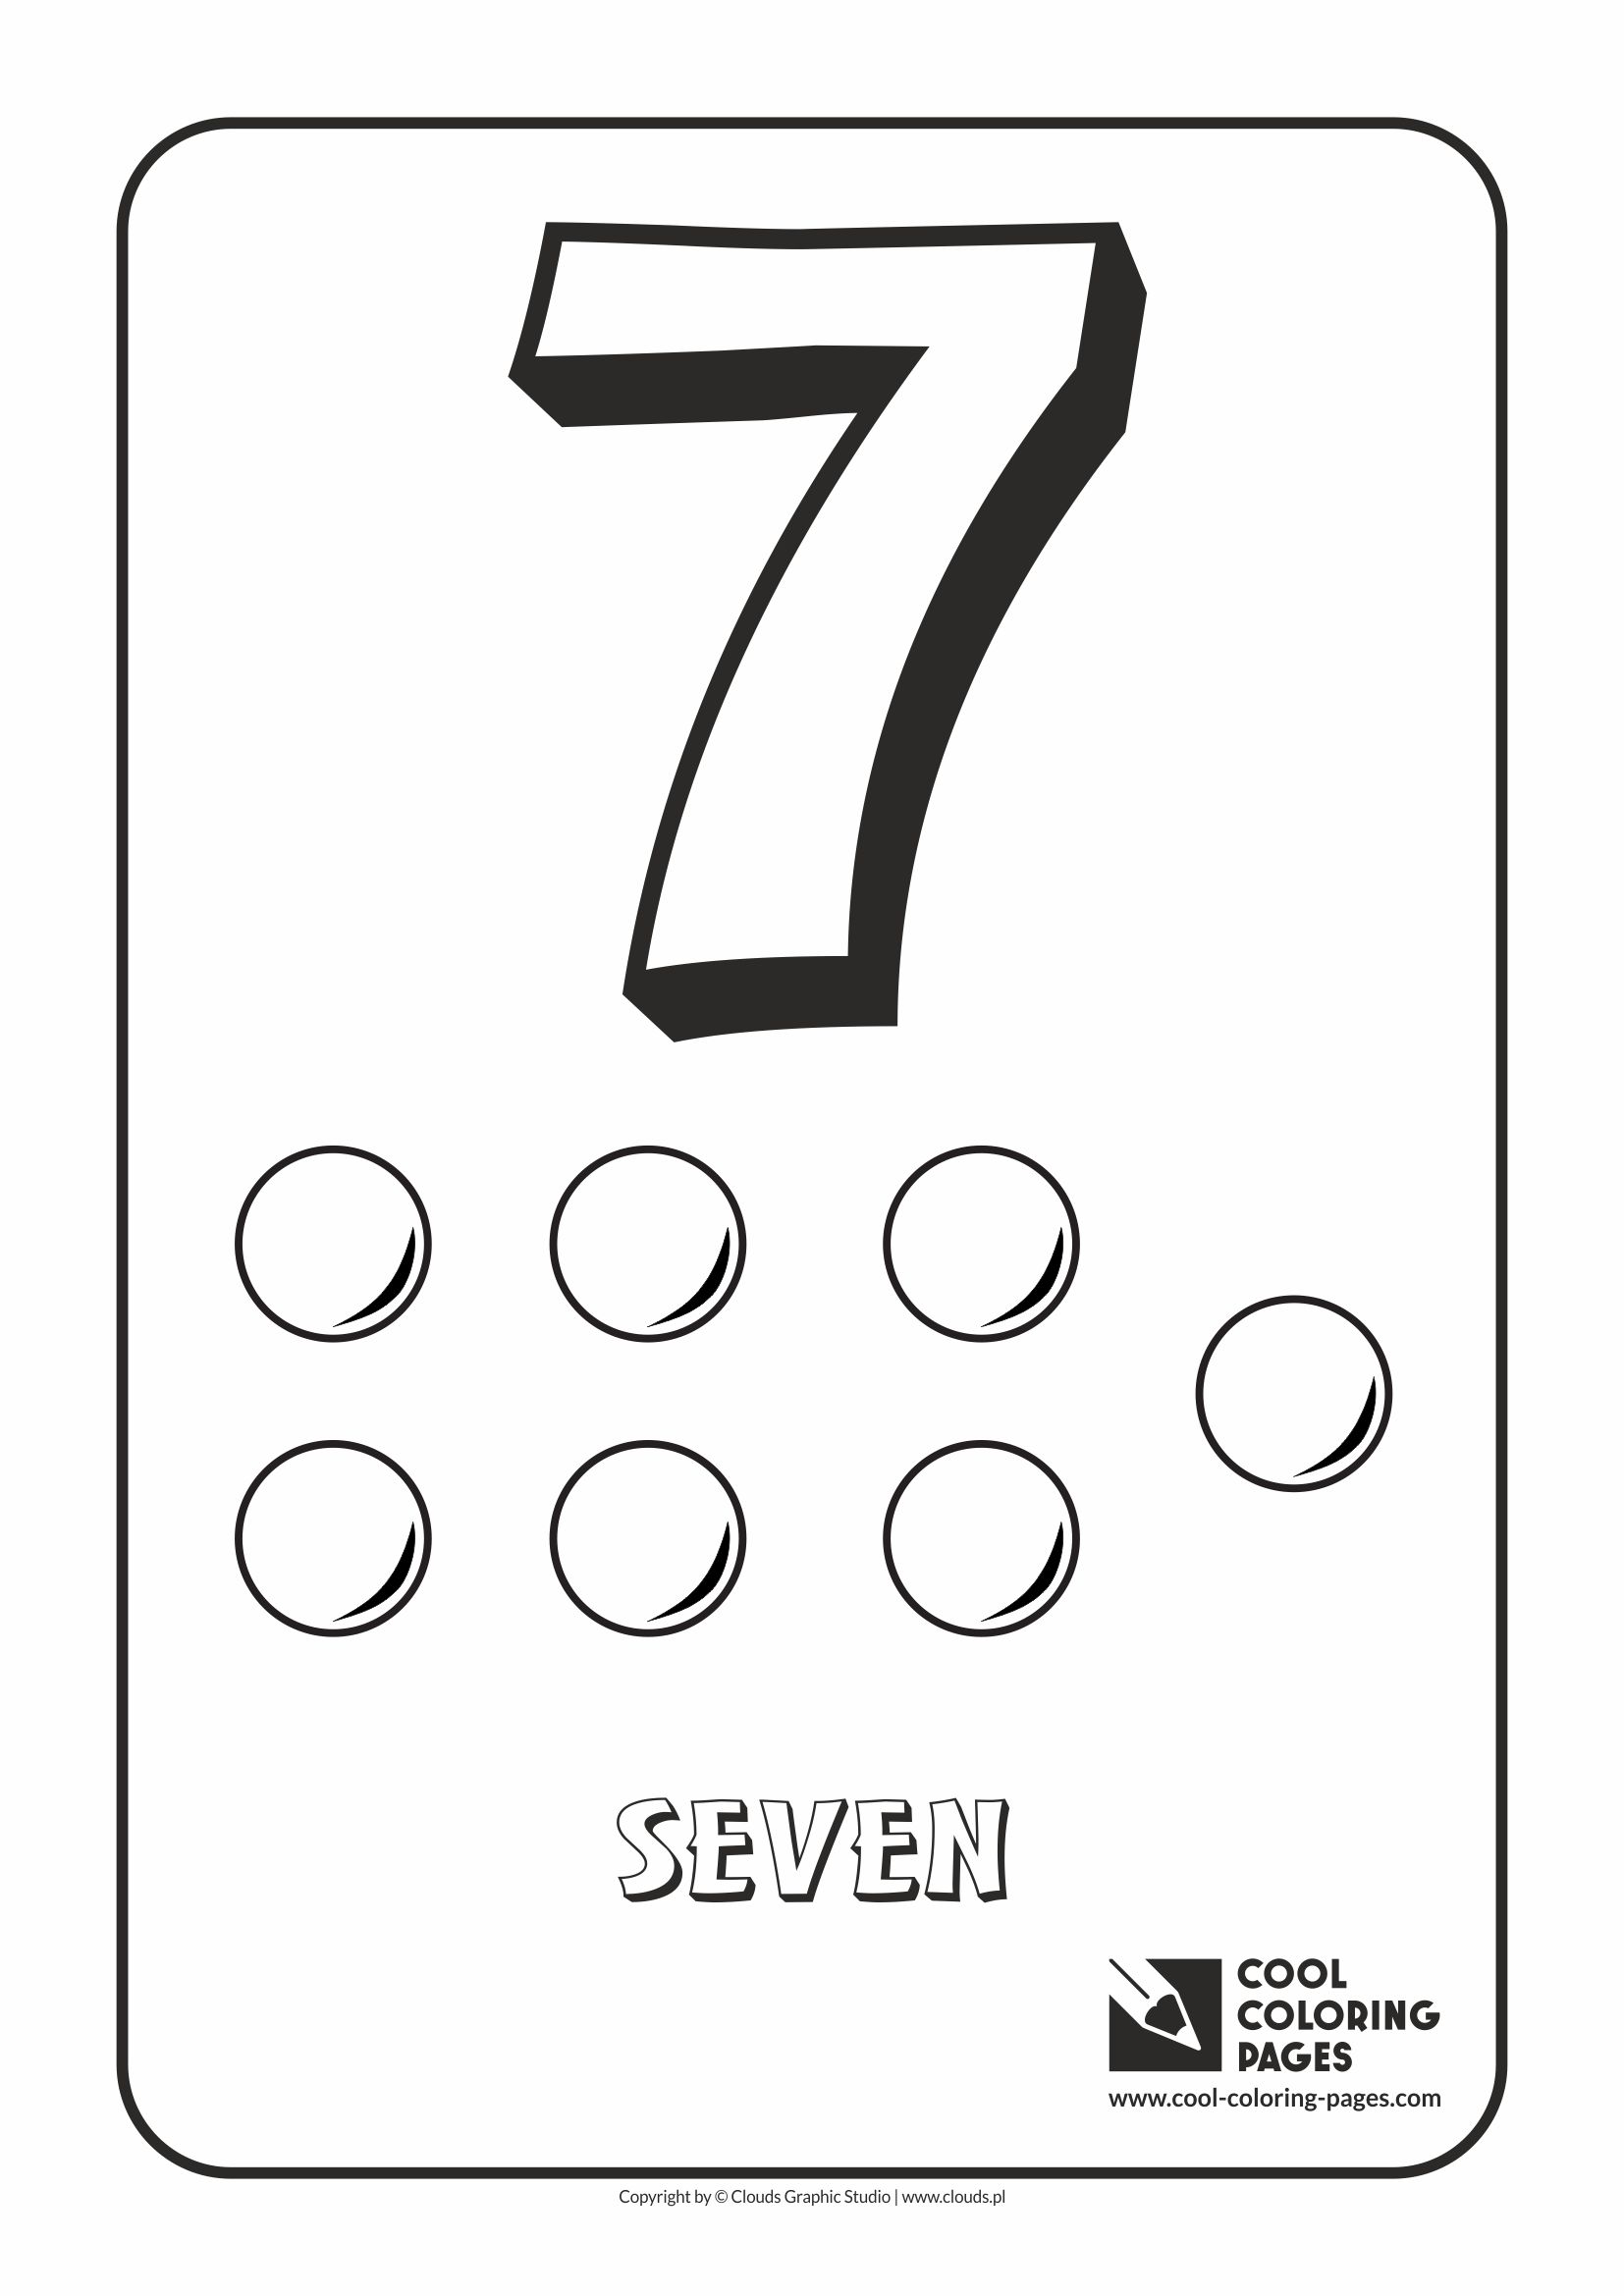 Cool Coloring Pages - Digits / Digit 7 / Coloring page with digit 7